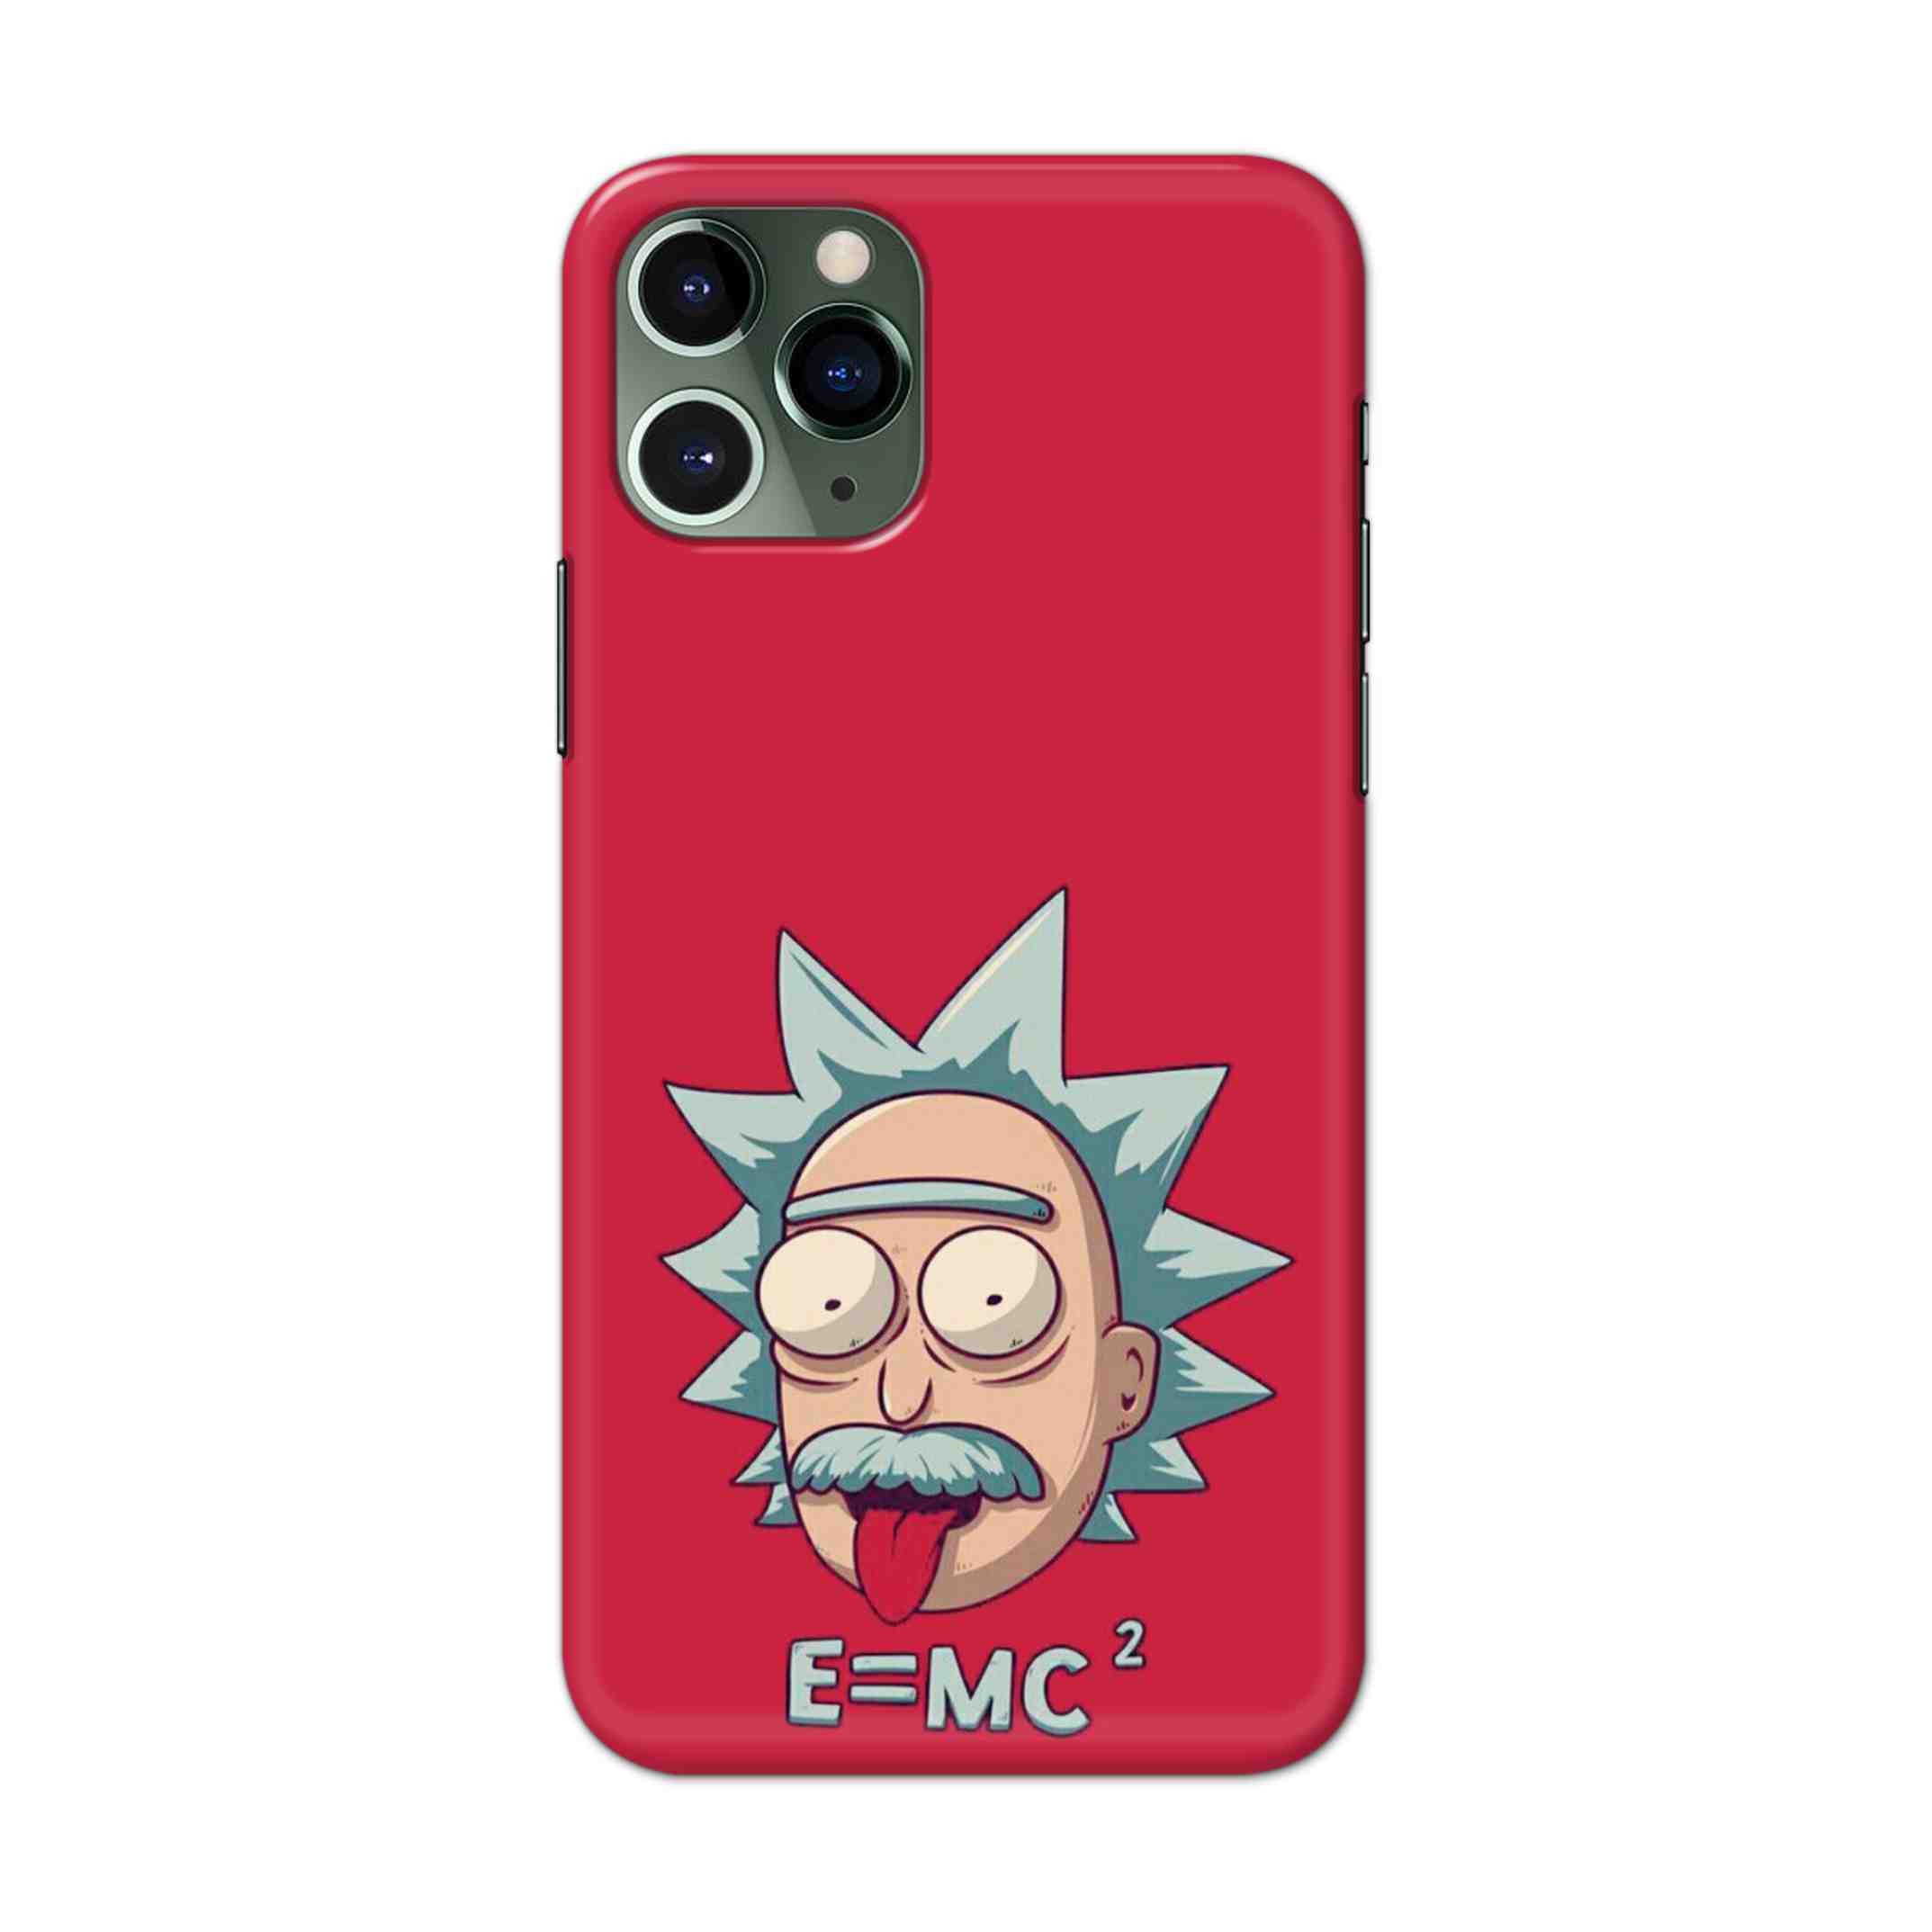 Buy E=Mc Hard Back Mobile Phone Case/Cover For iPhone 11 Pro Online